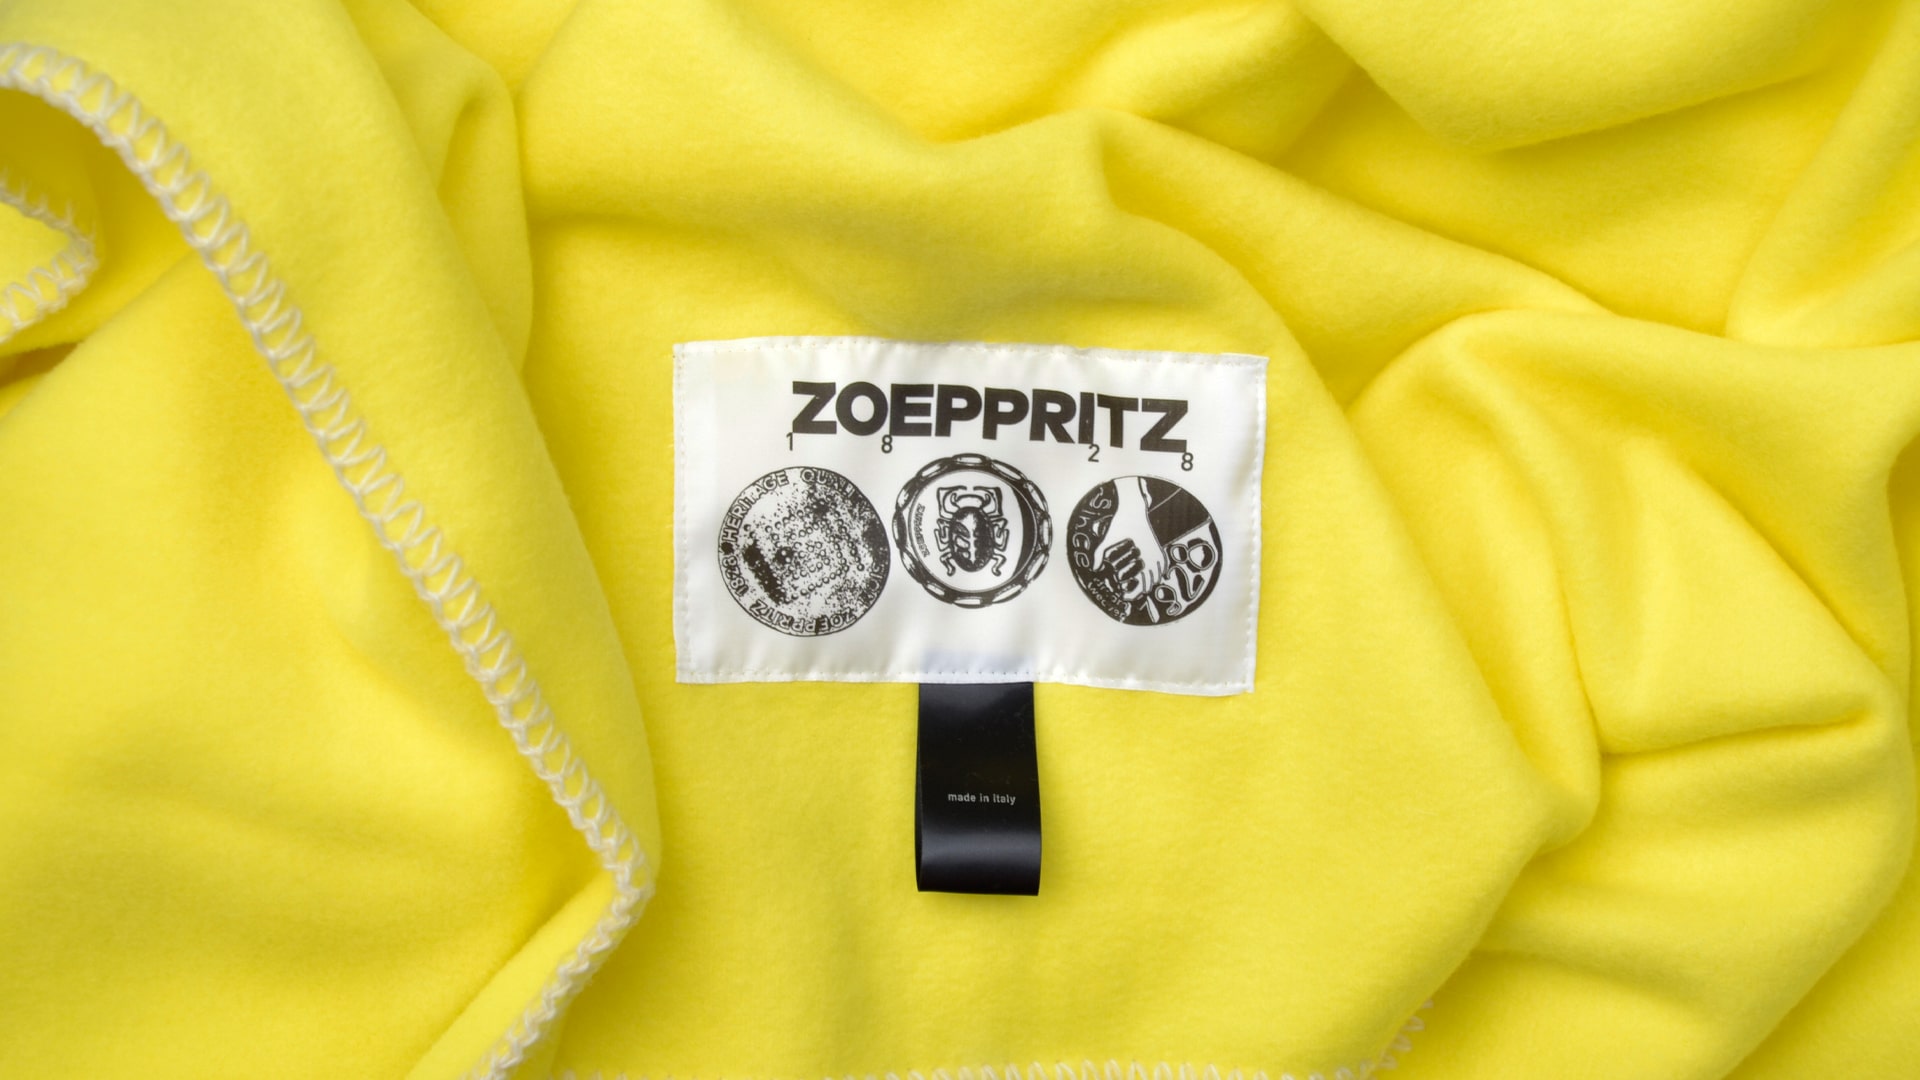 The best Soft-Fleece all over the world – that’s it!  the original from ZOEPPRITZ 1828! Discover it all!l